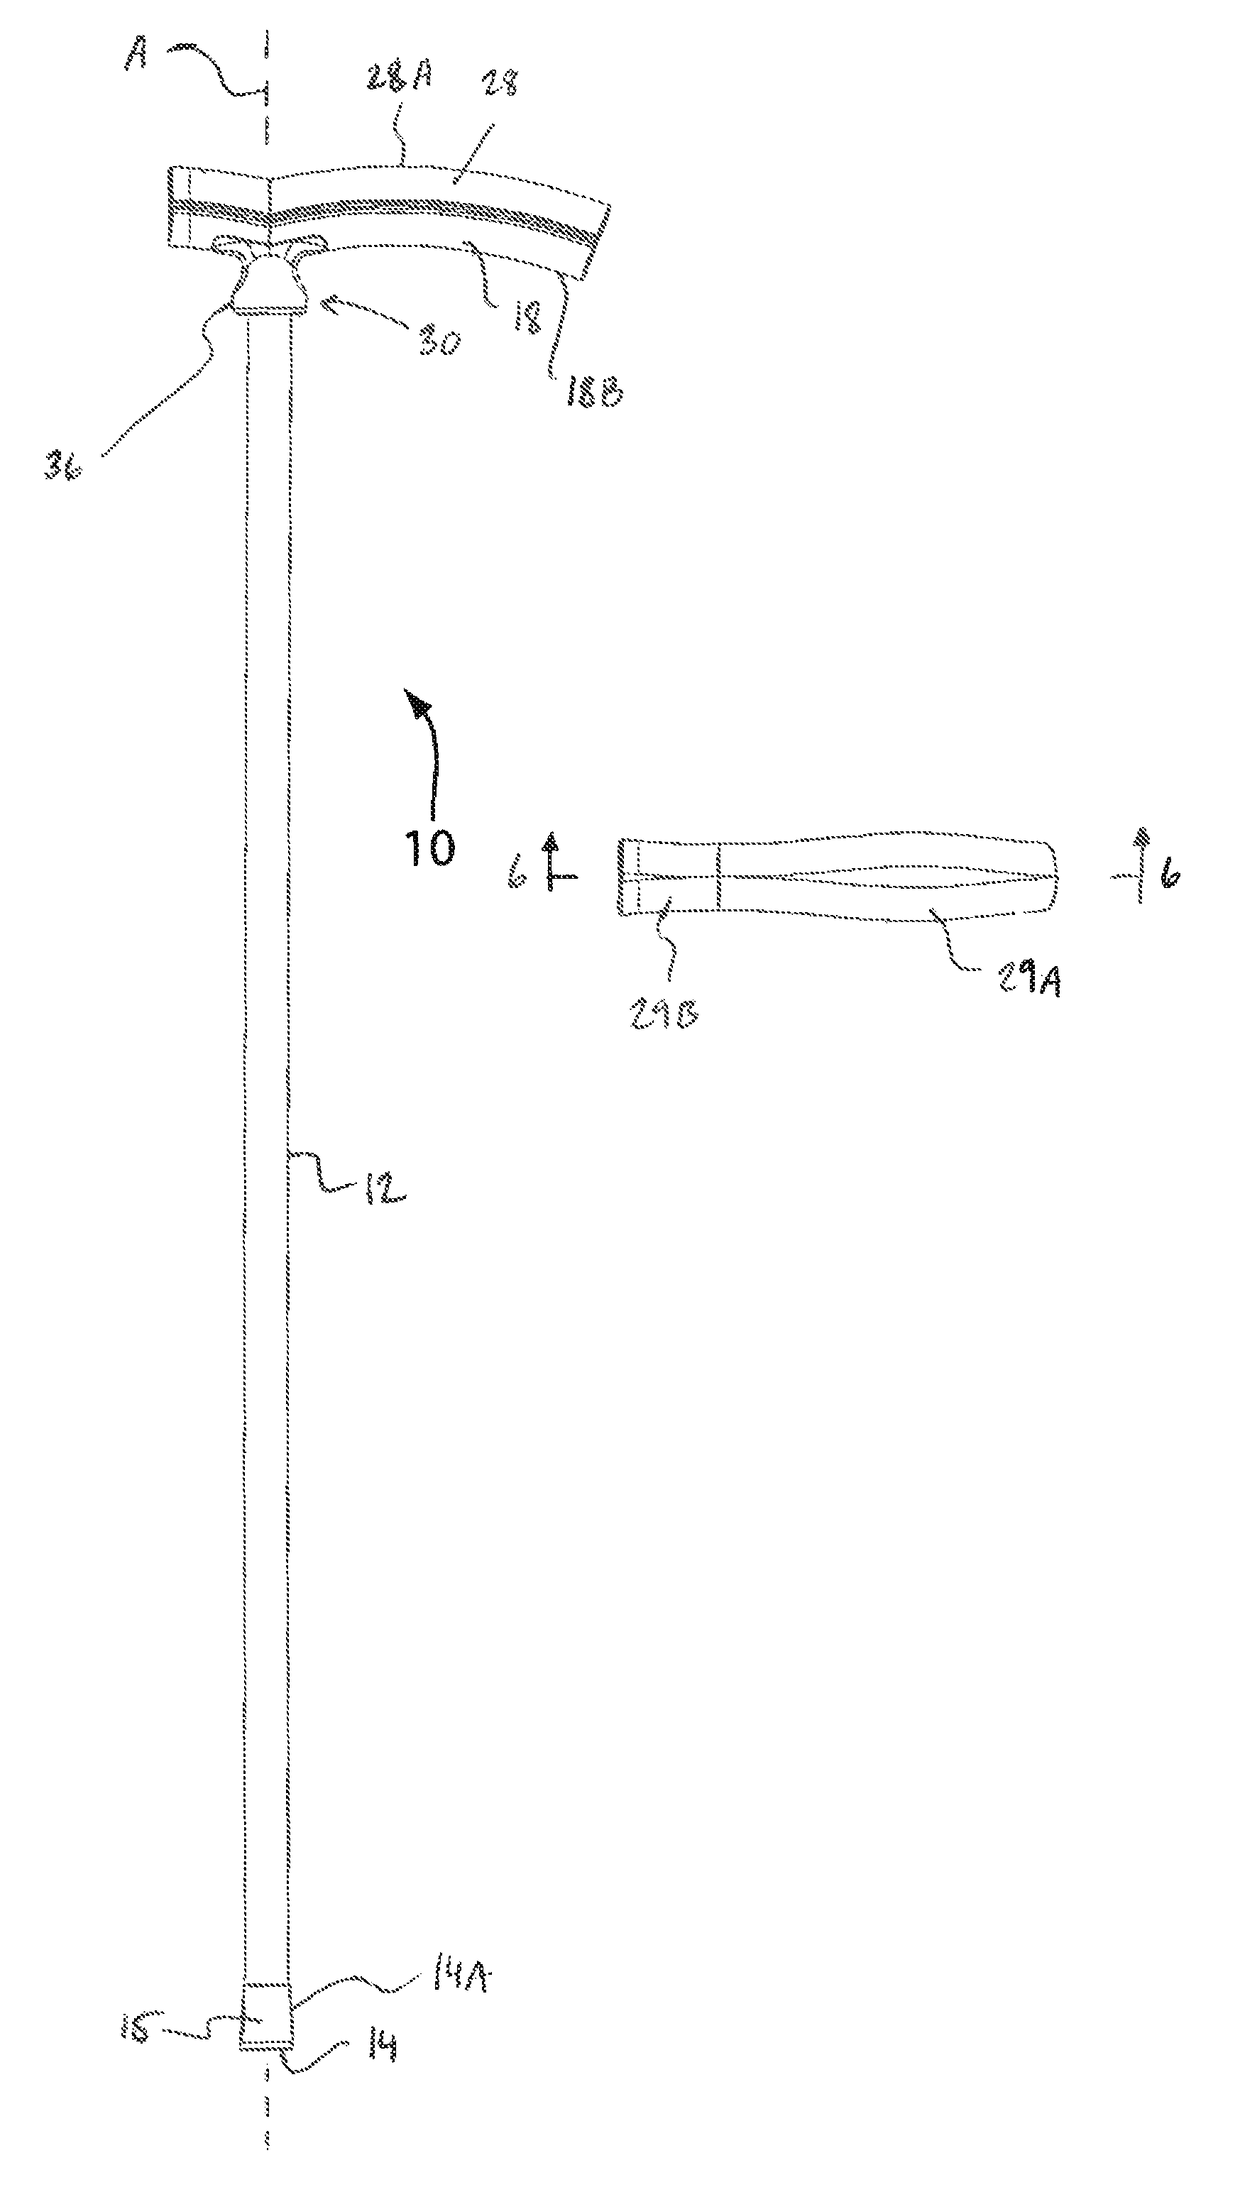 Apparatus for aiding mobility of a user